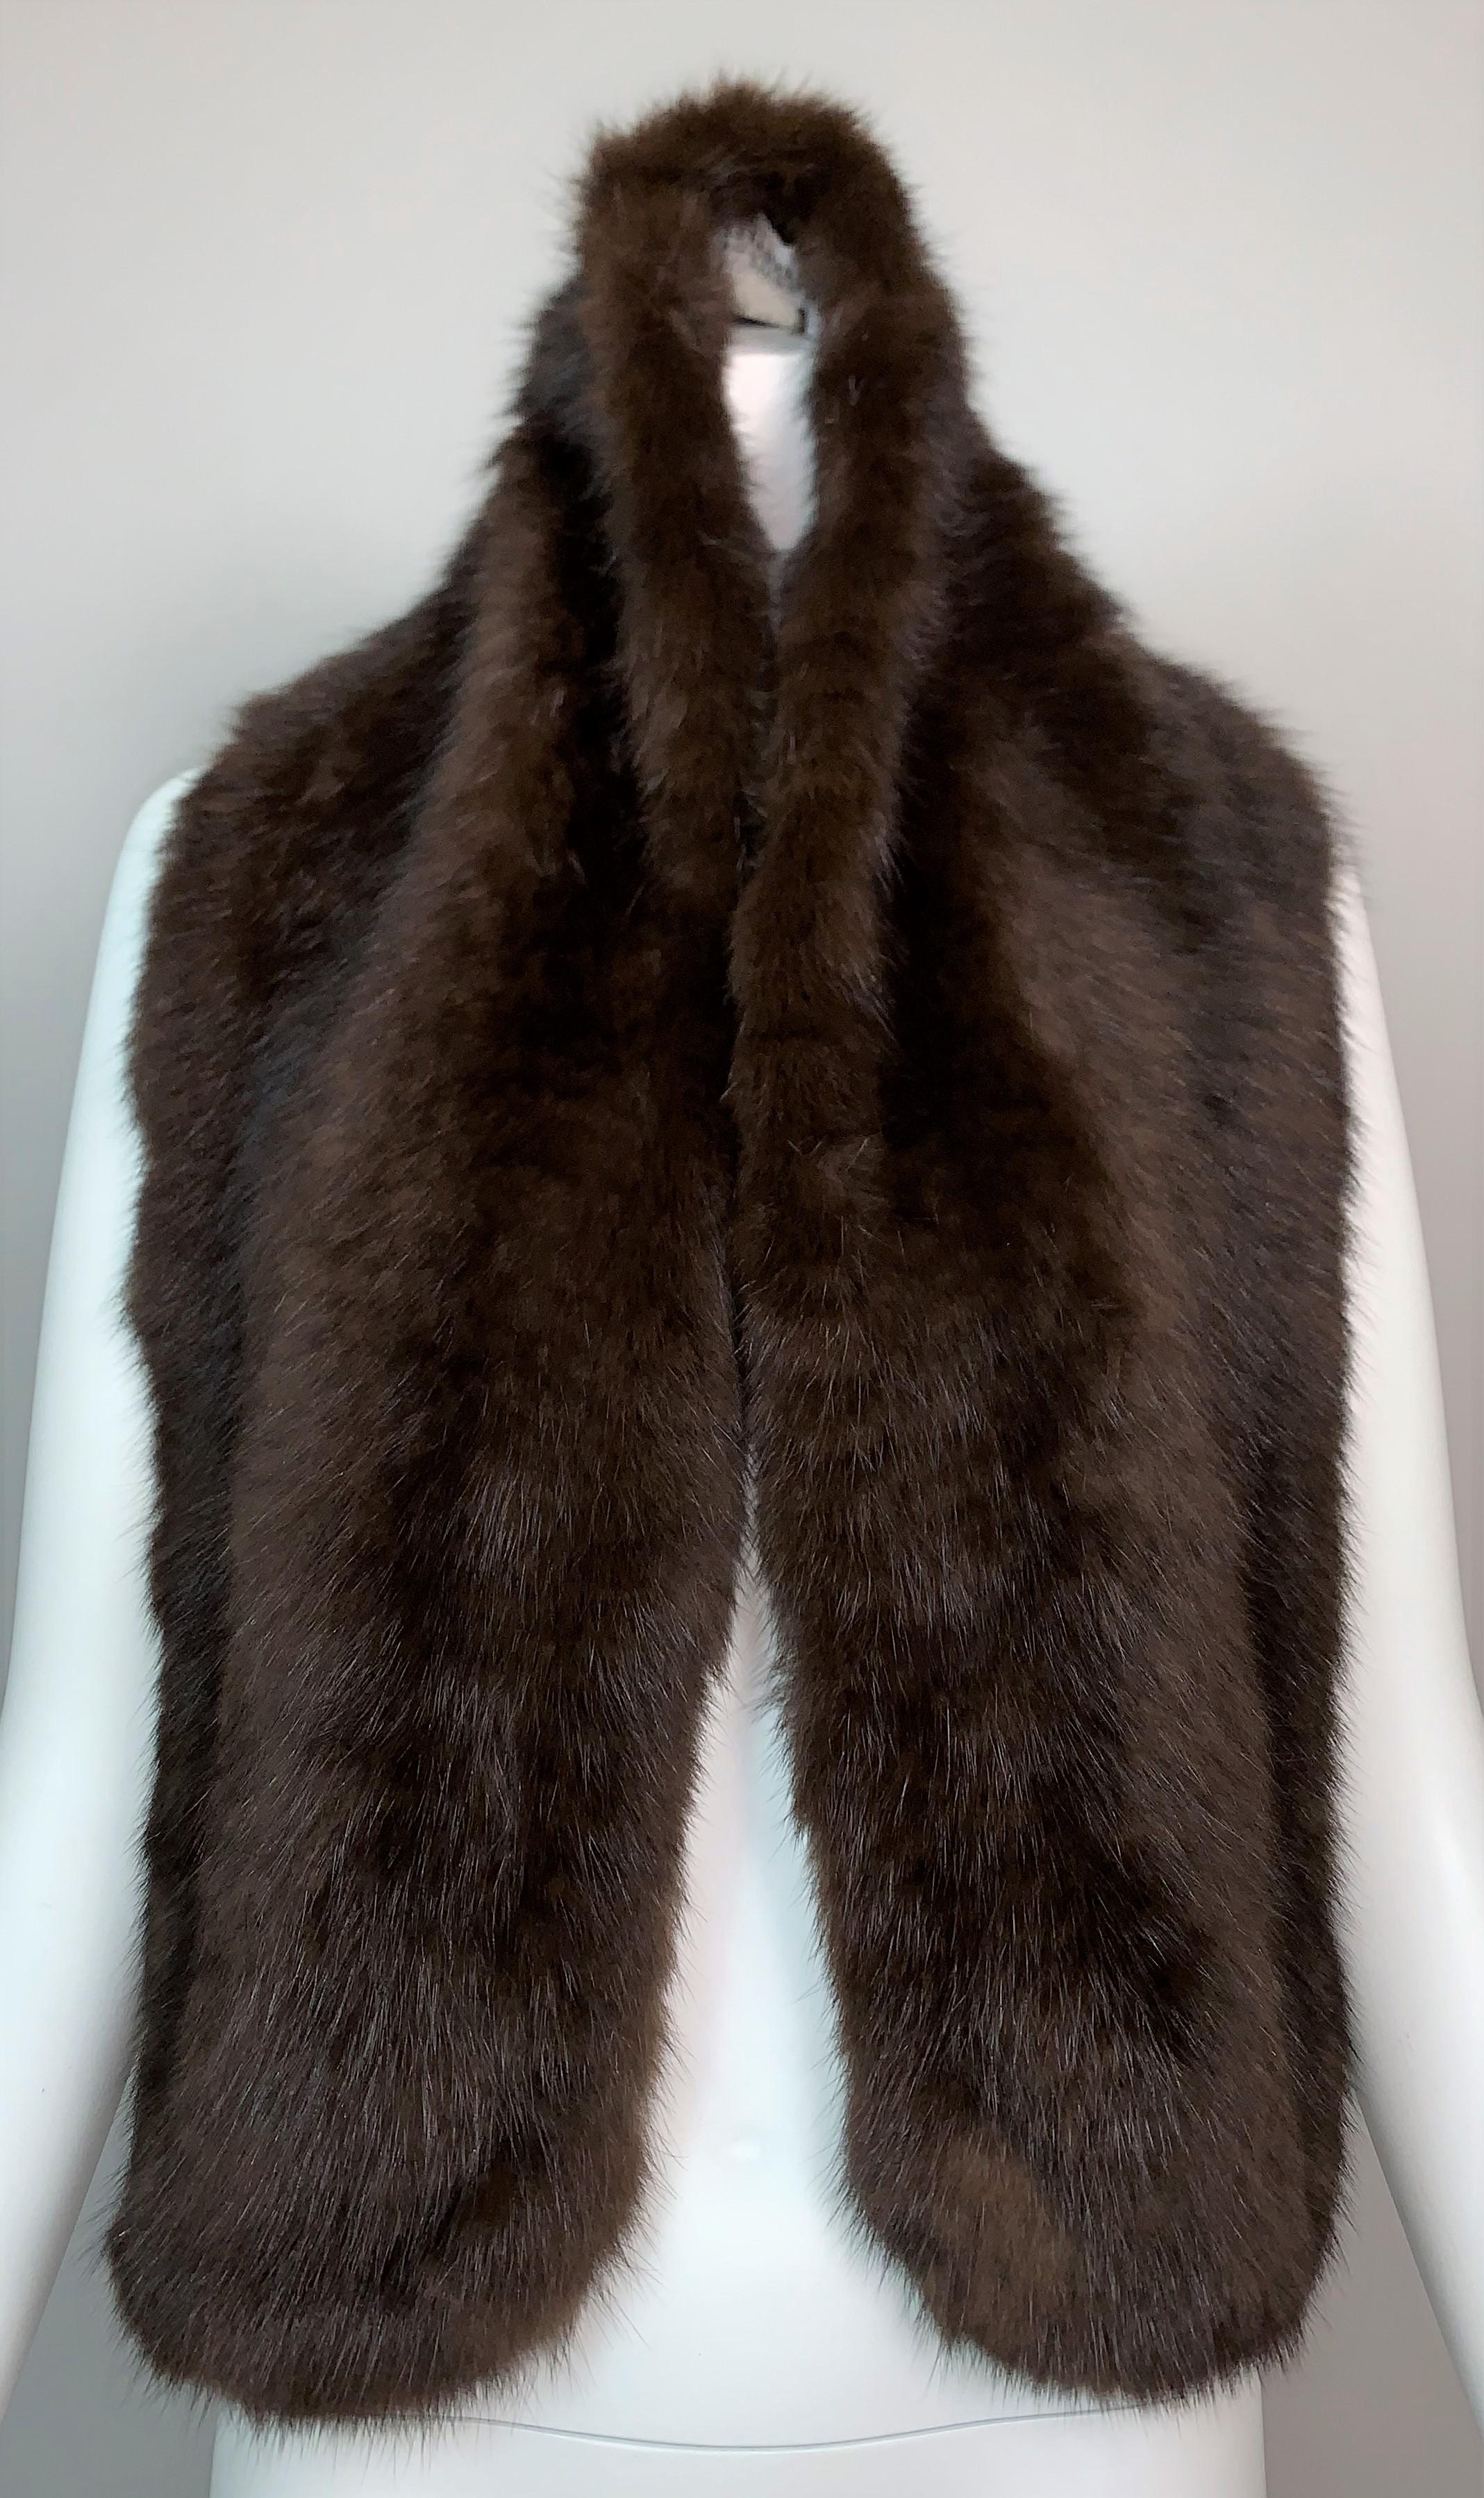 DESIGNER: 1990's Christian Dior by John Galliano

Please contact us for more images and/or information.

CONDITION: Excellent

FABRIC: Sable Fur

COUNTRY: France

SIZE: 50